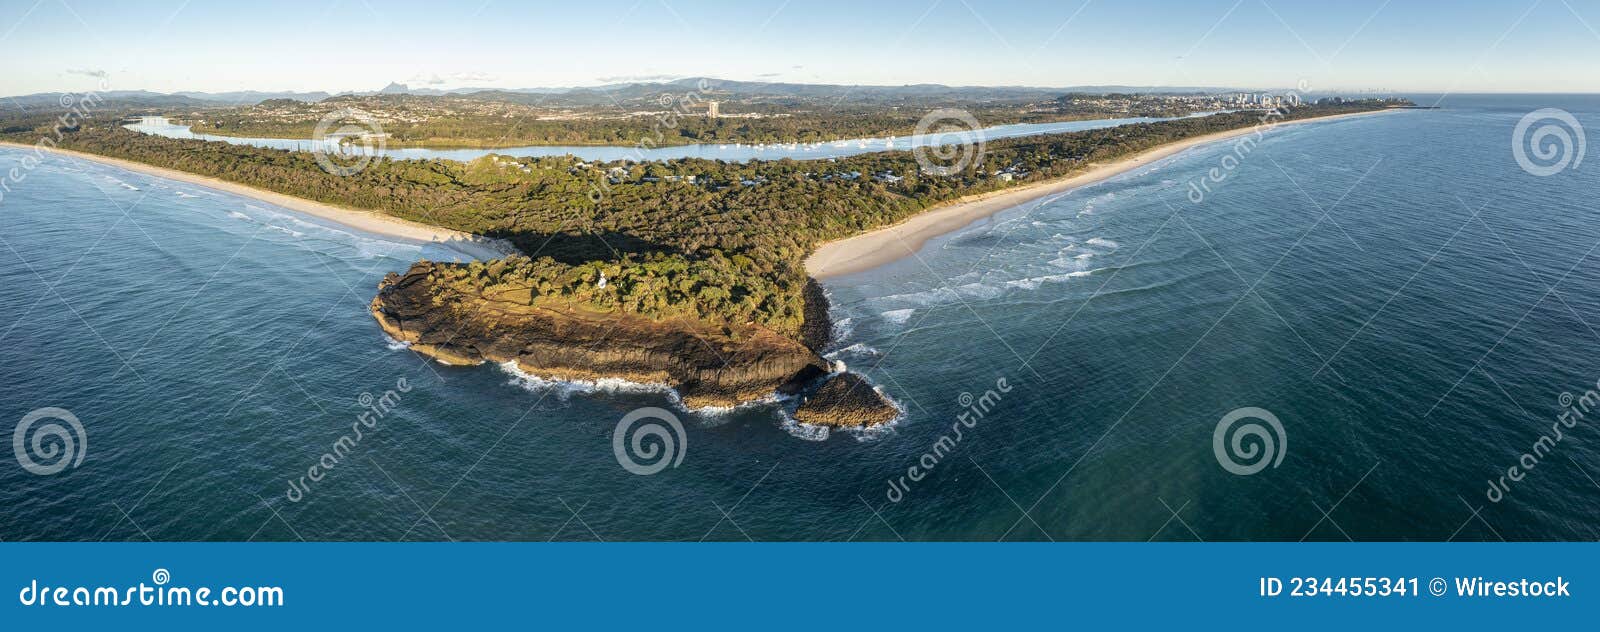 aerial view of the fingal head lighthouse near tweed heads in northern new south wales, australia